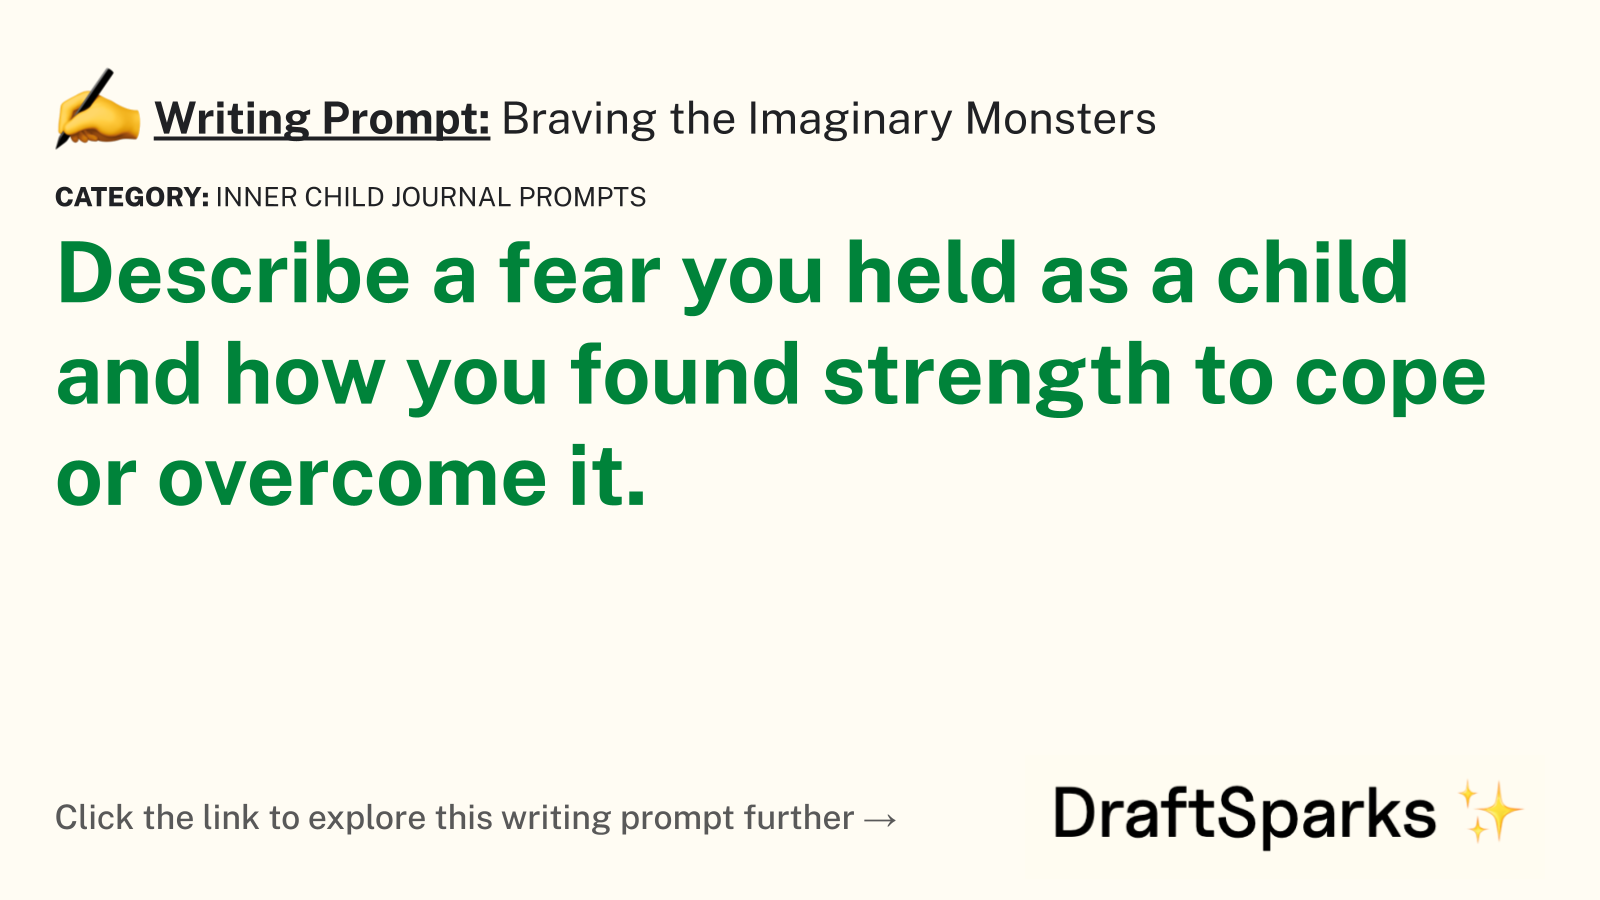 Braving the Imaginary Monsters